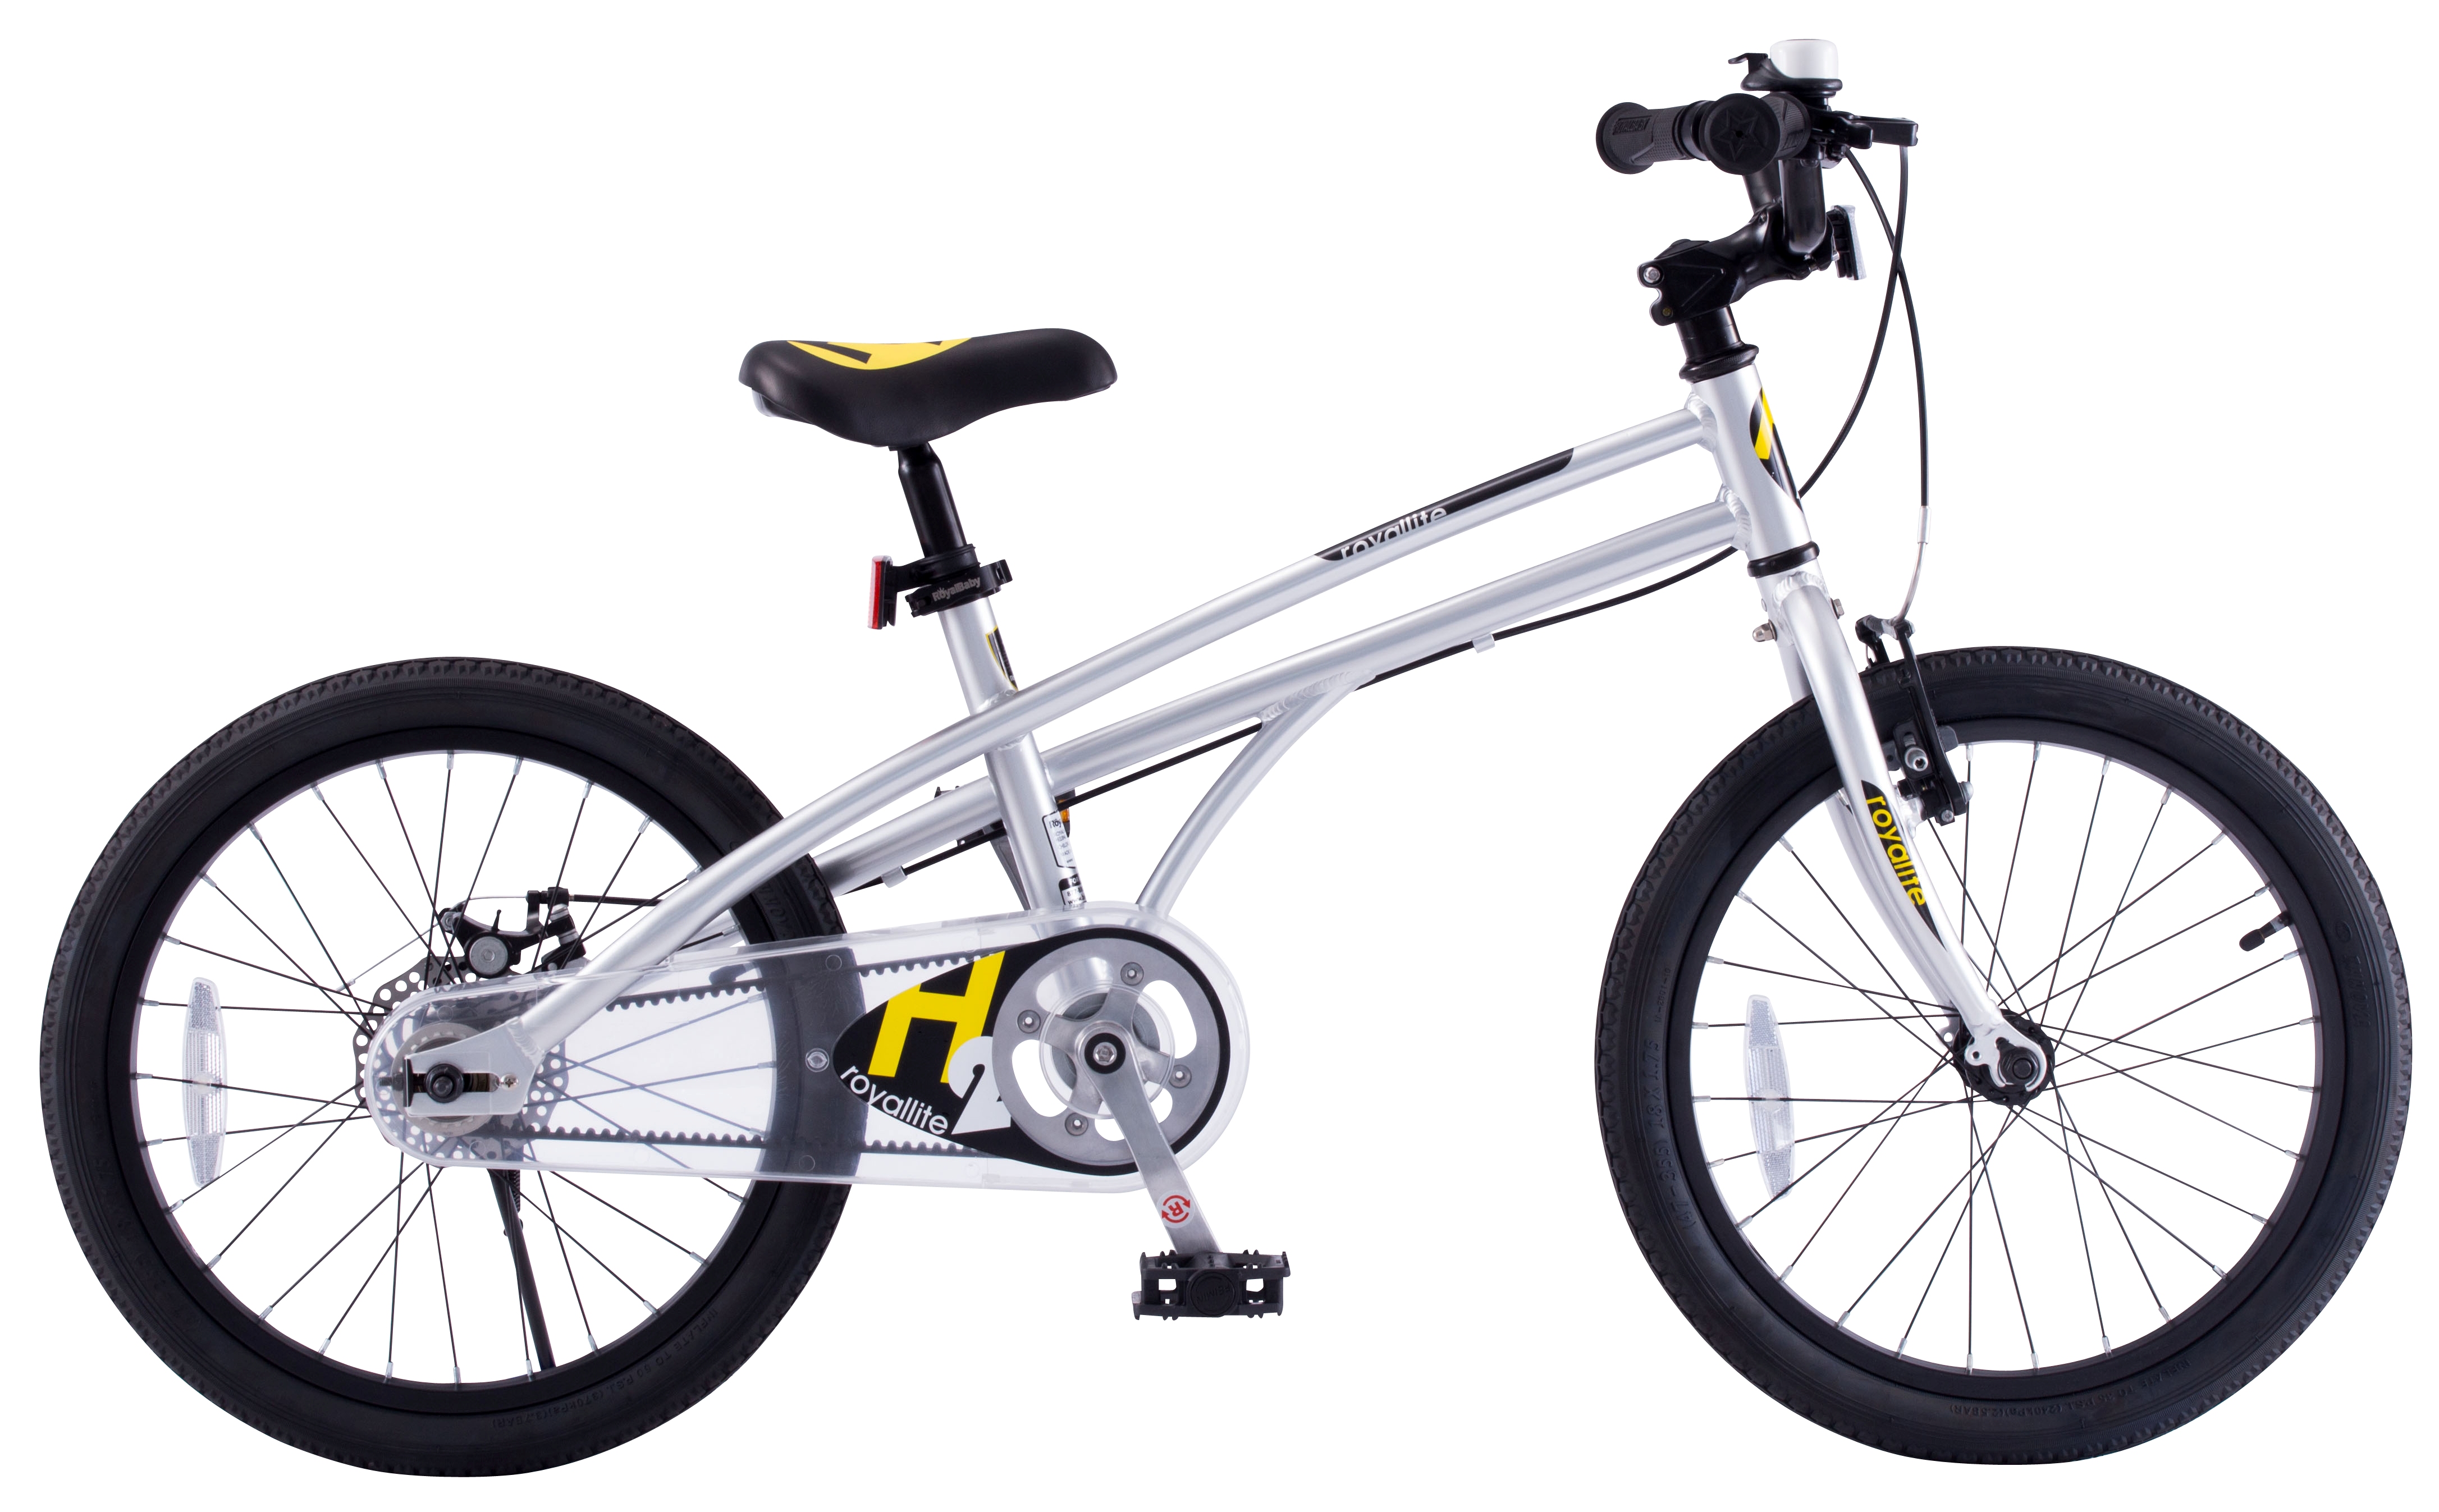 Royalbaby RoyalBaby H2 Super Light Alloy 18 Inch Kids Bicycle Age 4 - 6, Silver and Yellow - image 1 of 5